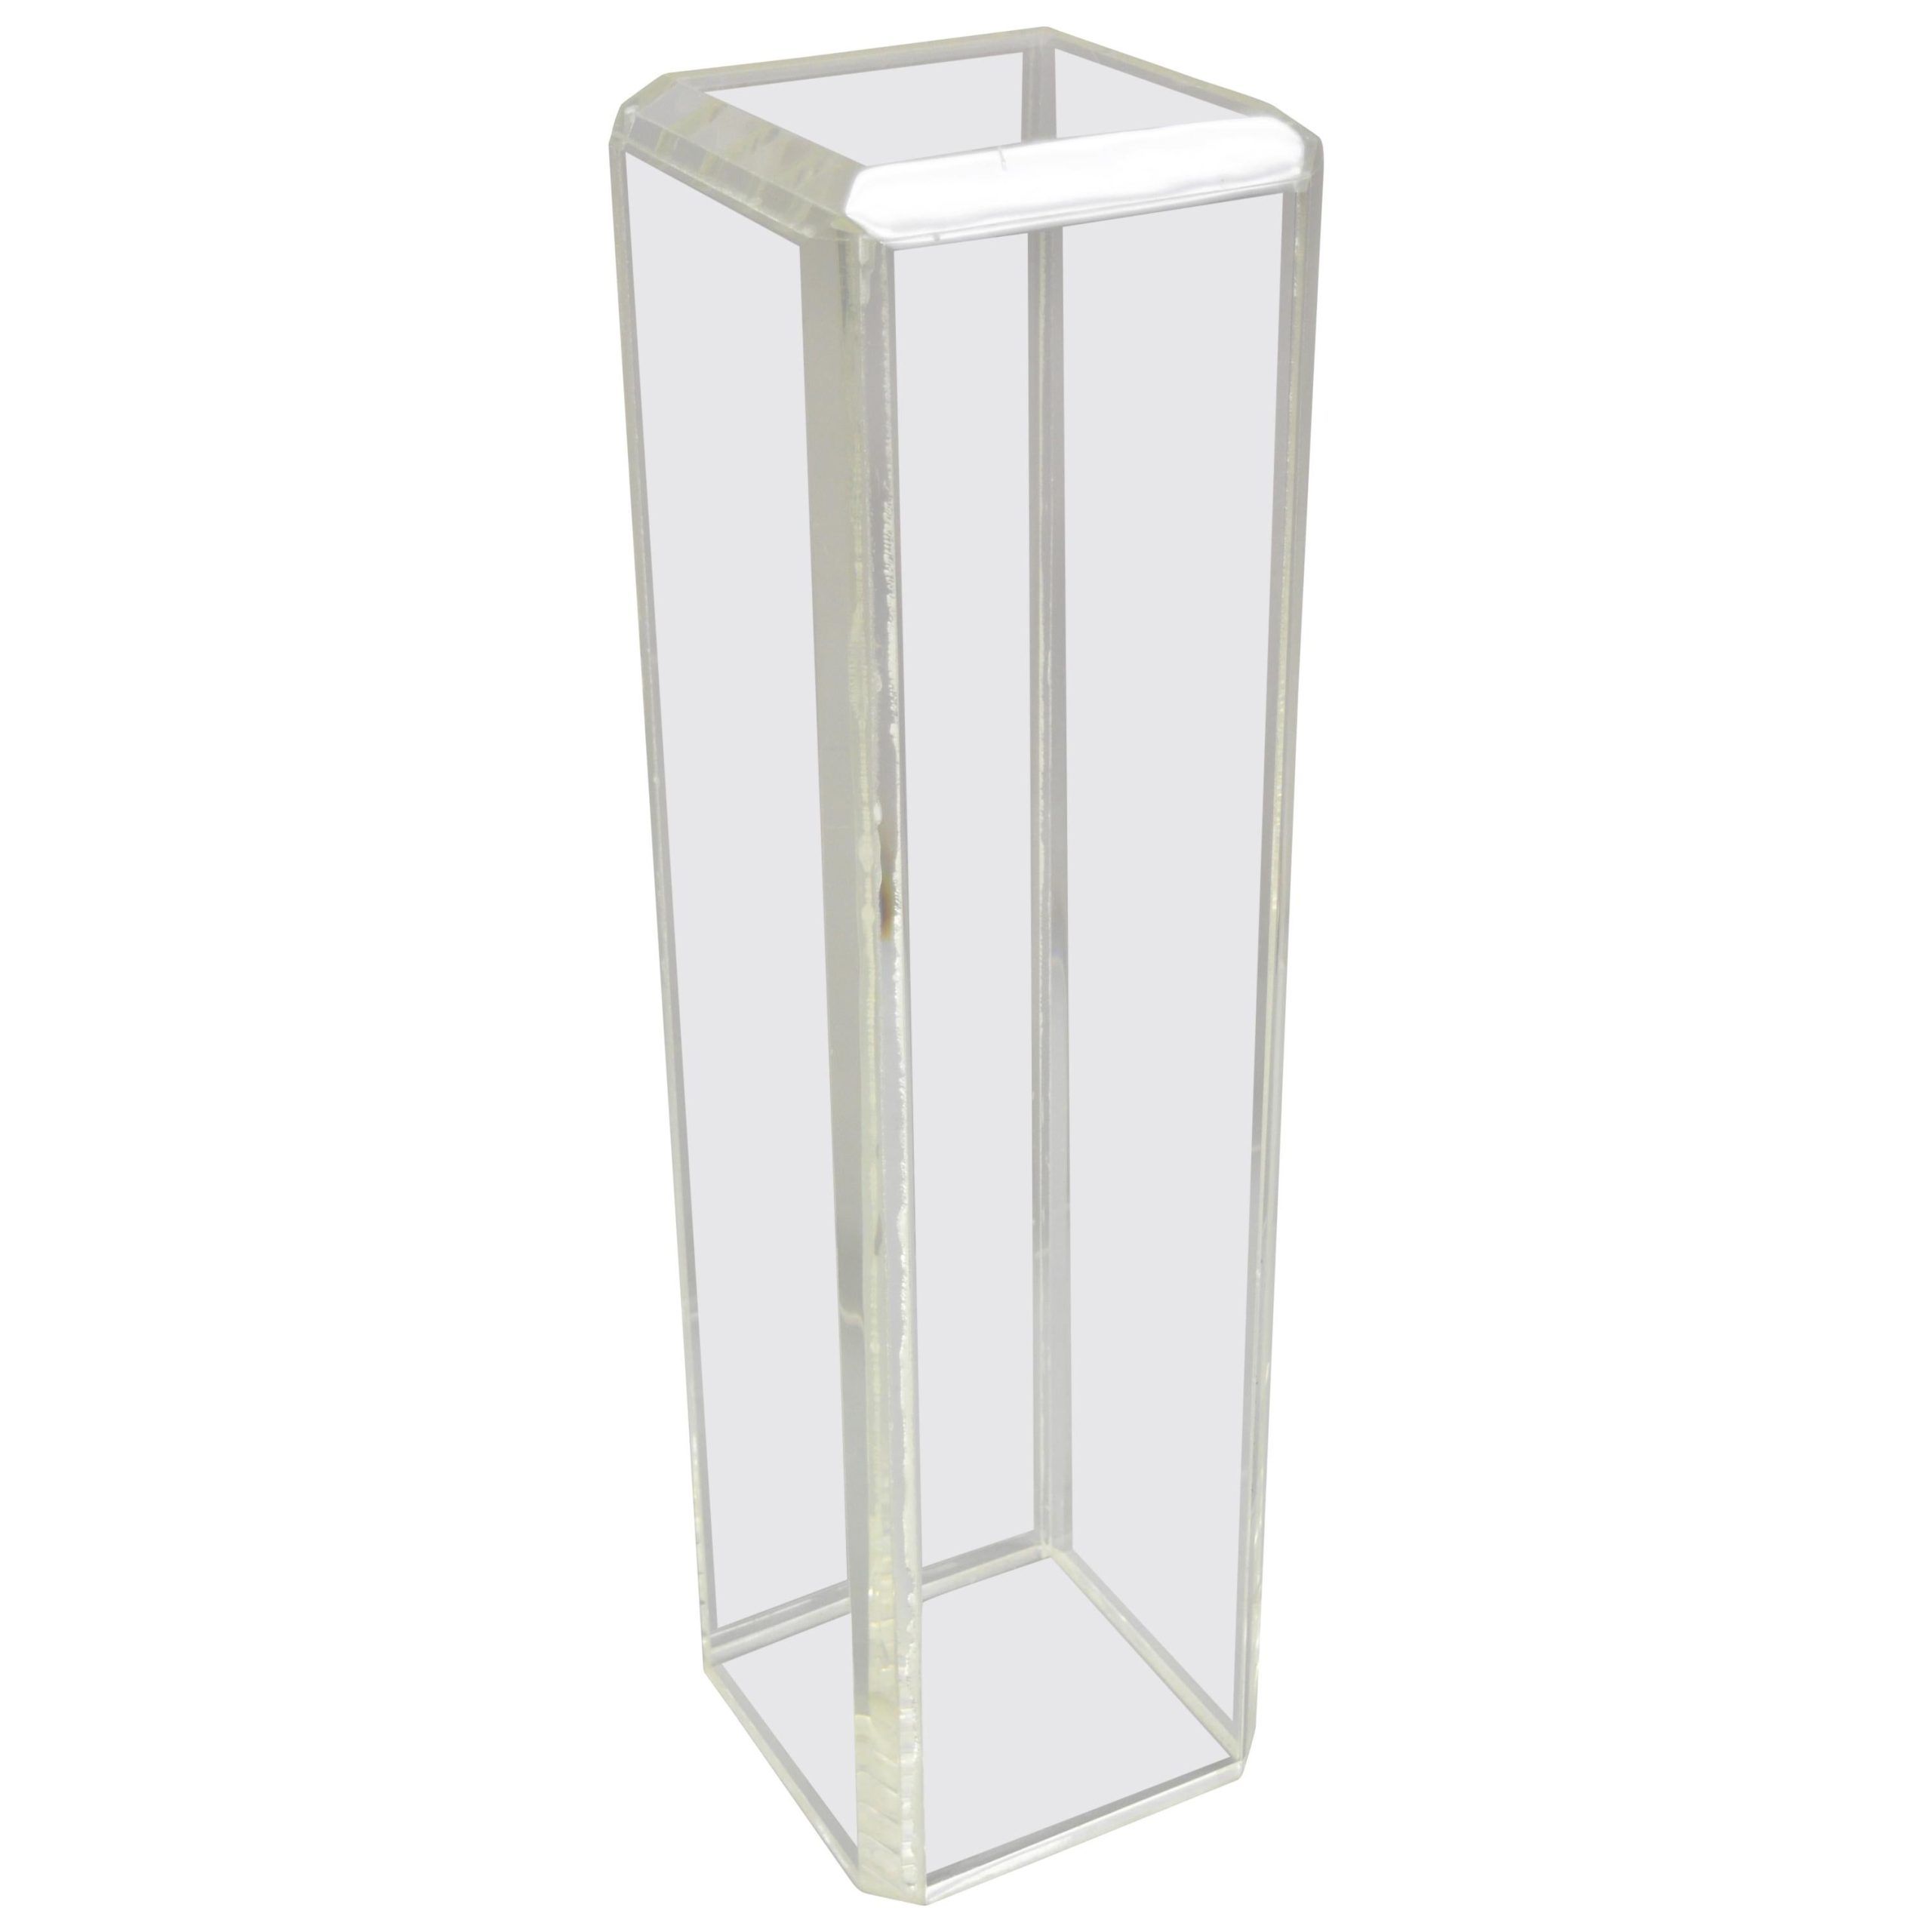 Vintage Mid Century Modern Clear Lucite Acrylic Pedestal Bust Plant Stand  For Sale At 1stdibs | Lucite Plant Stand, Clear Plant Stand, Lucite  Pedestal Stand For Clear Plant Stands (View 5 of 15)